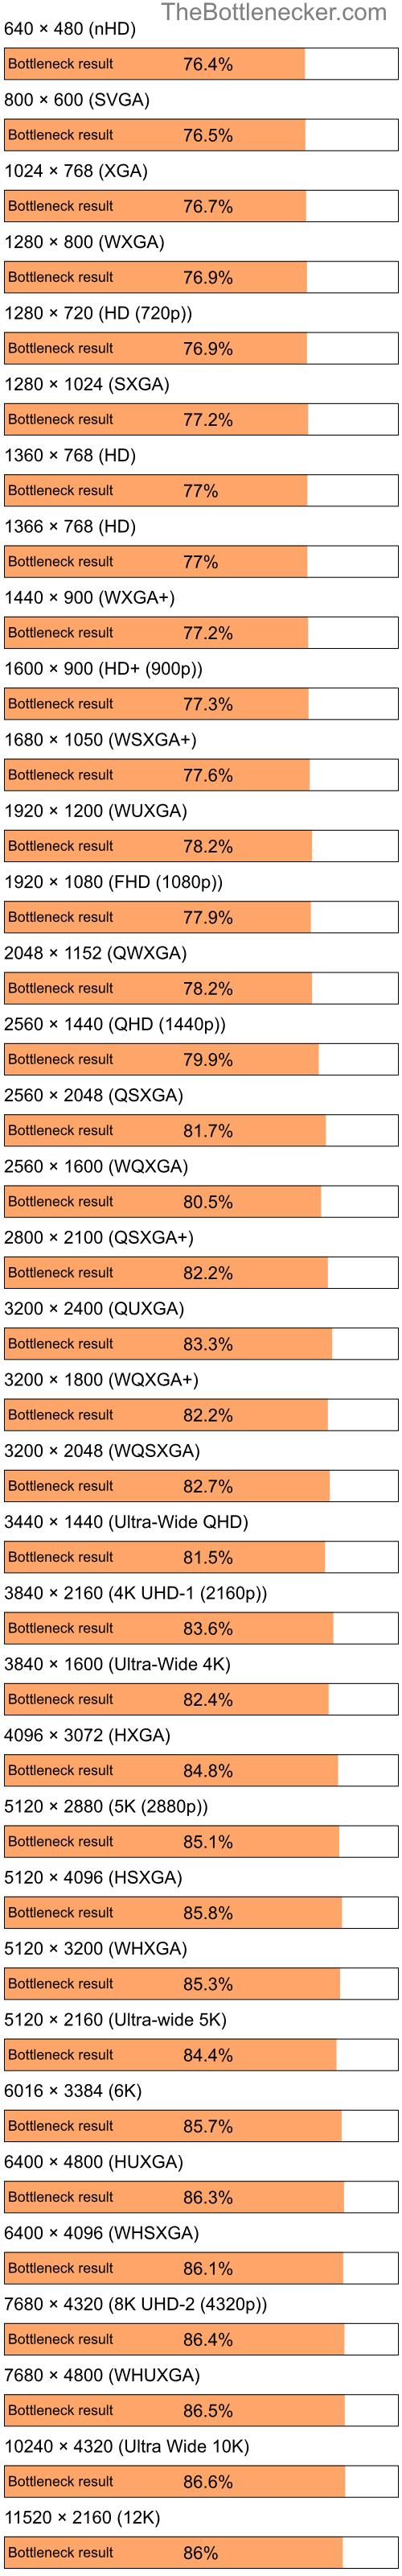 Bottleneck results by resolution for Intel Celeron M 420 and AMD Radeon 2100 in Graphic Card Intense Tasks